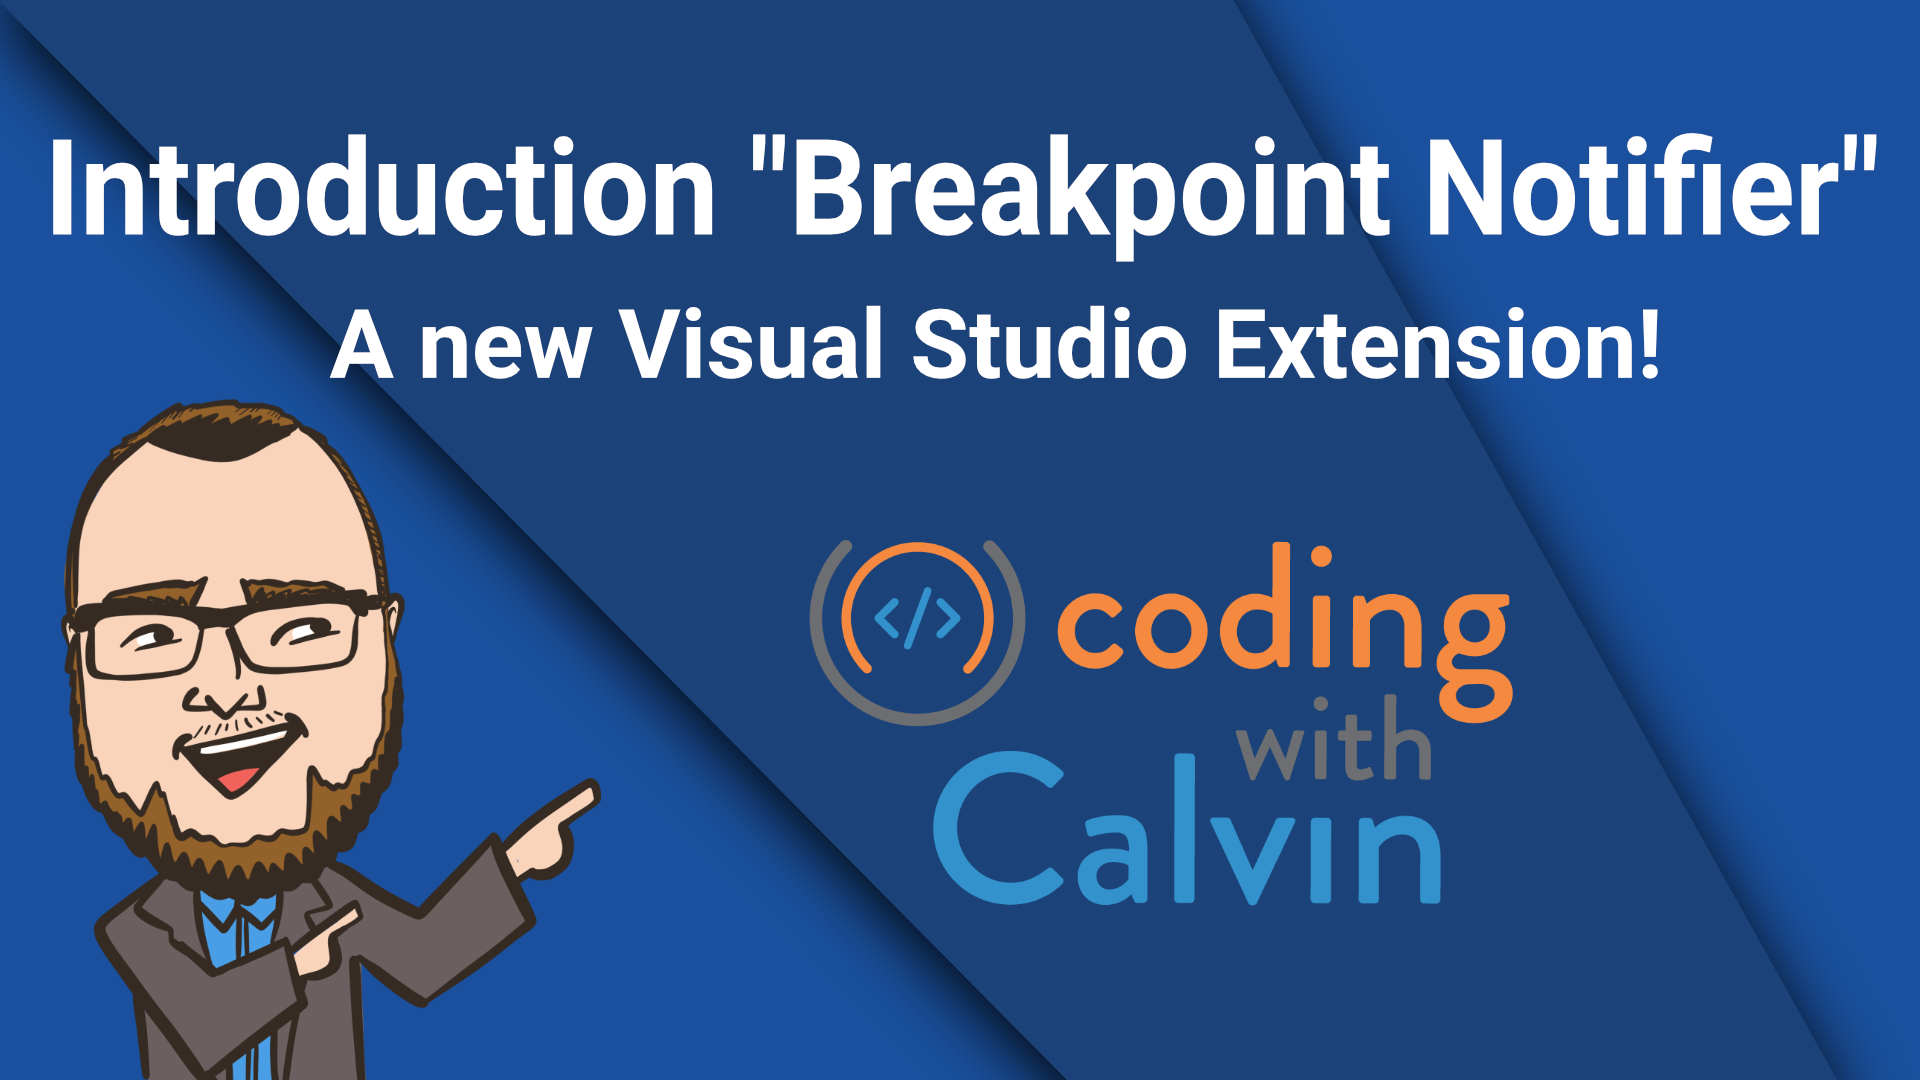 Introducing the 'Breakpoint Notifier' Visual Studio extension!